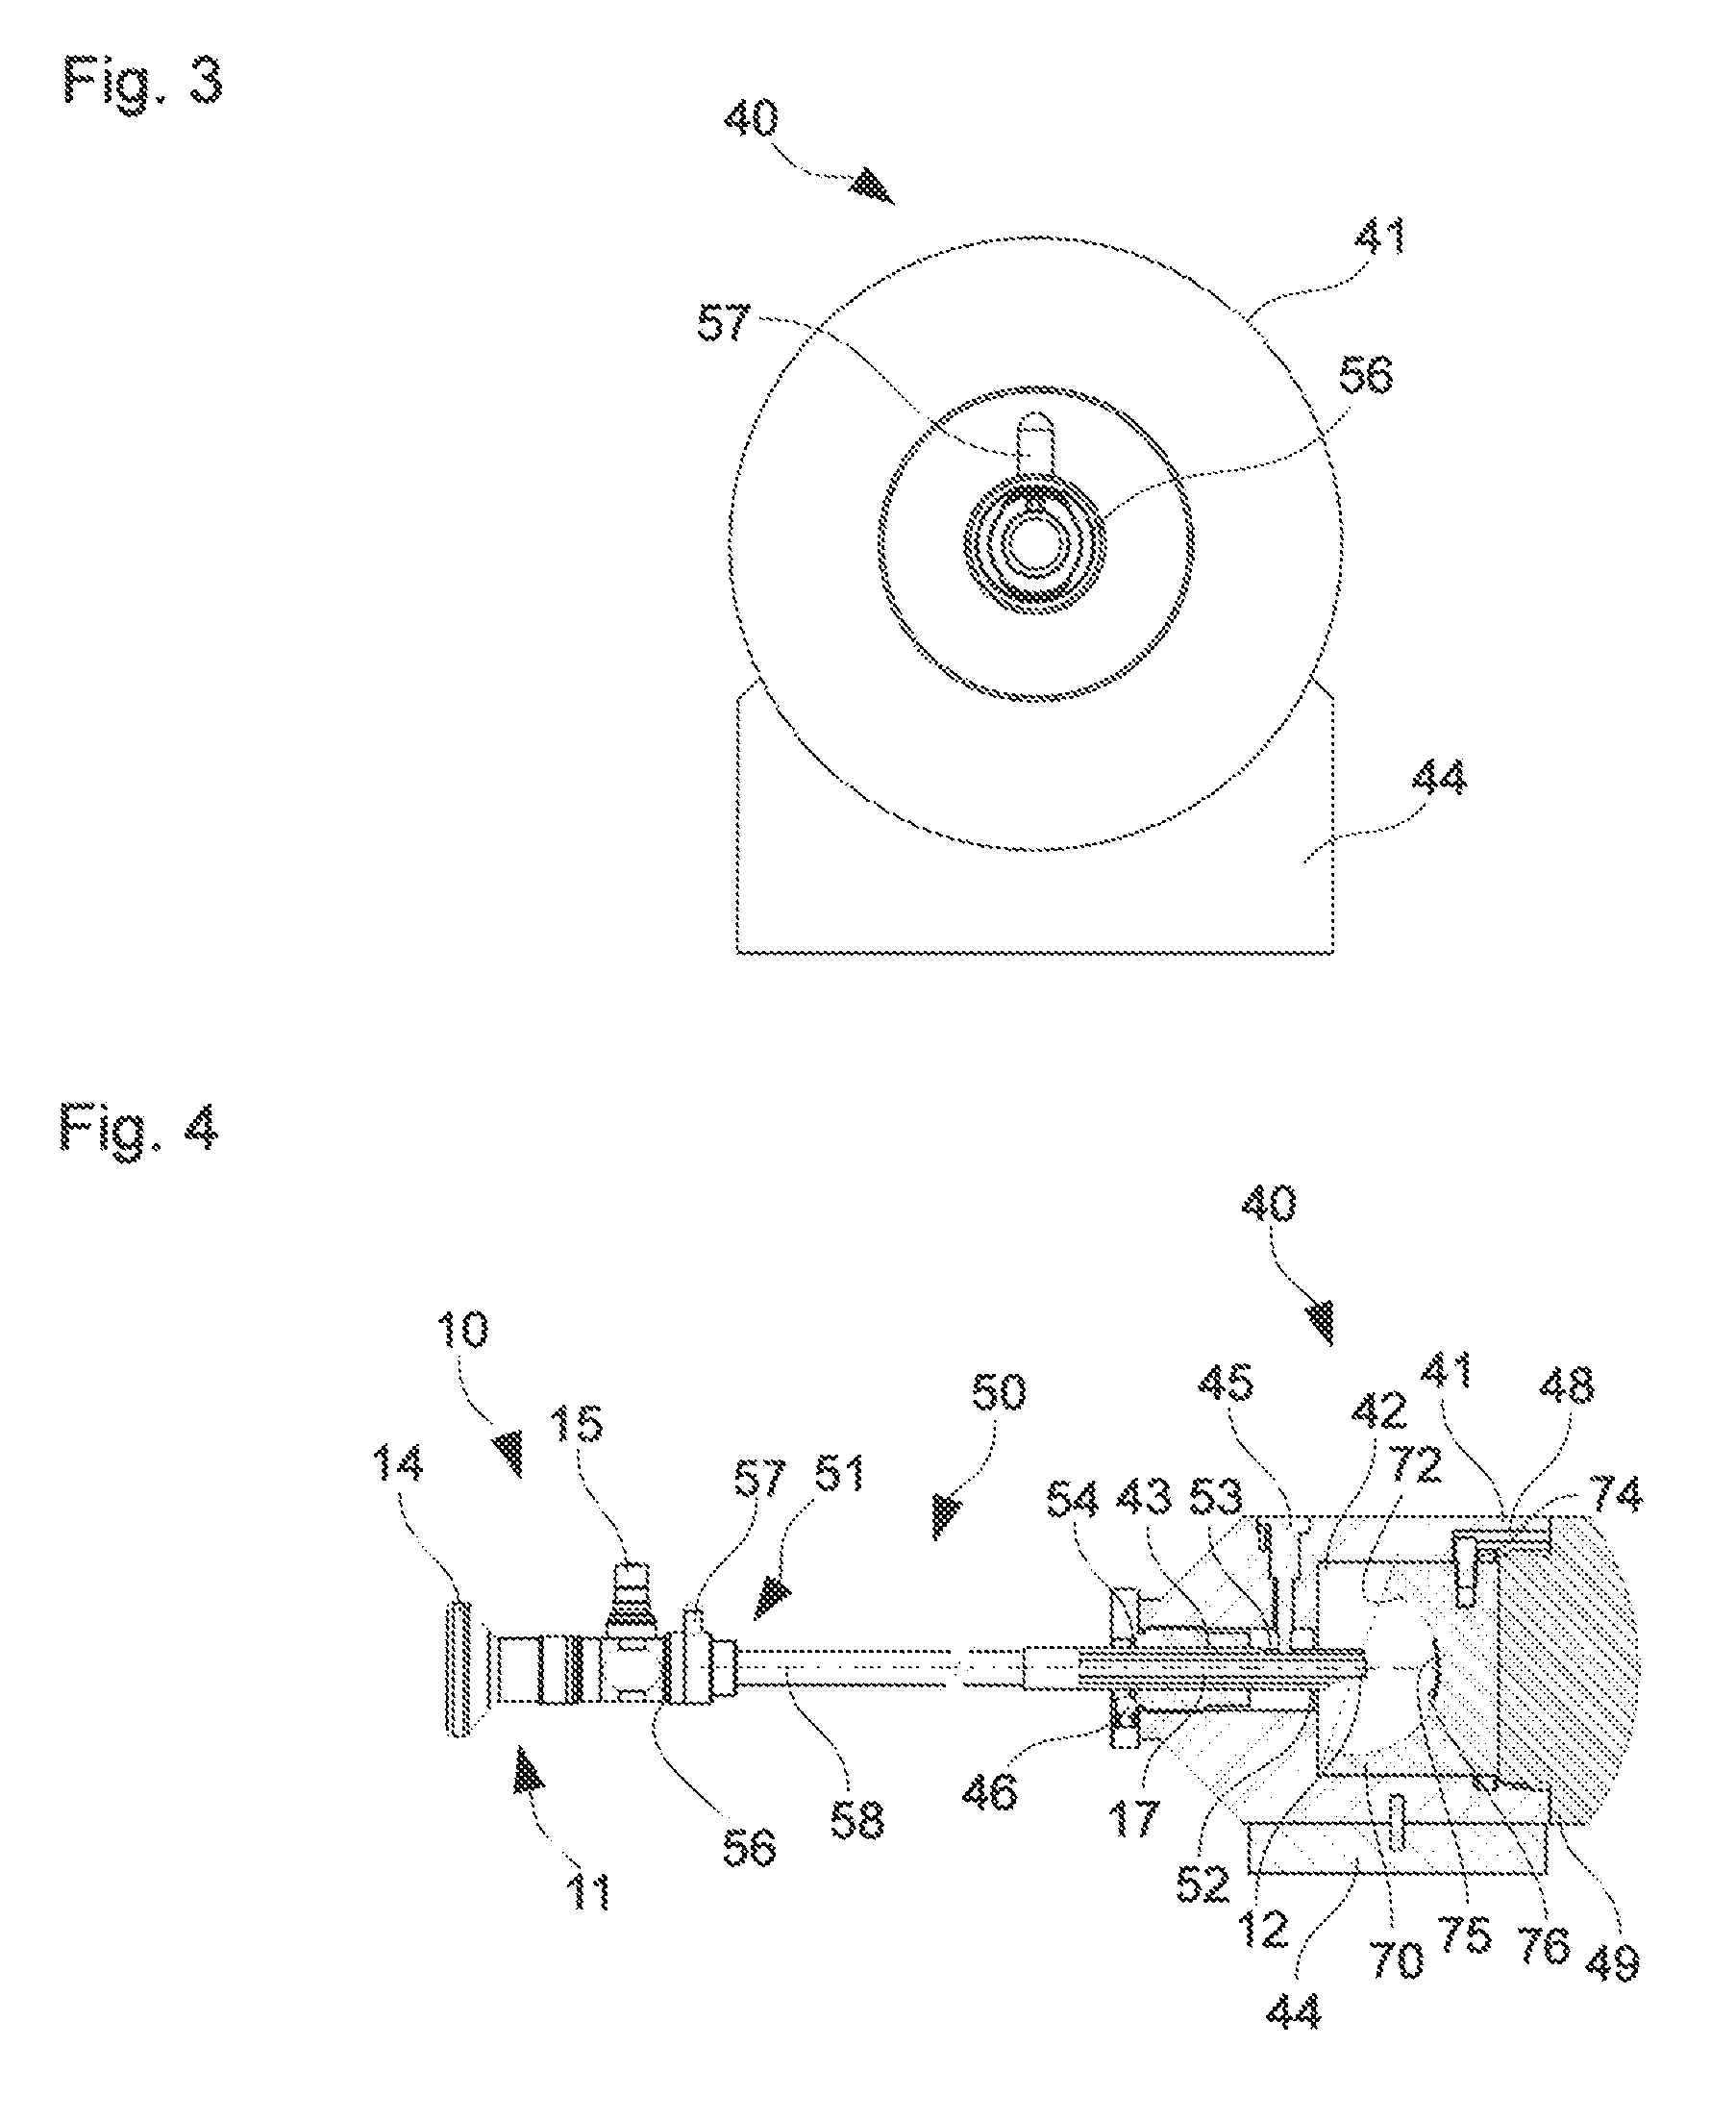 Test apparatus for an optical investigation system